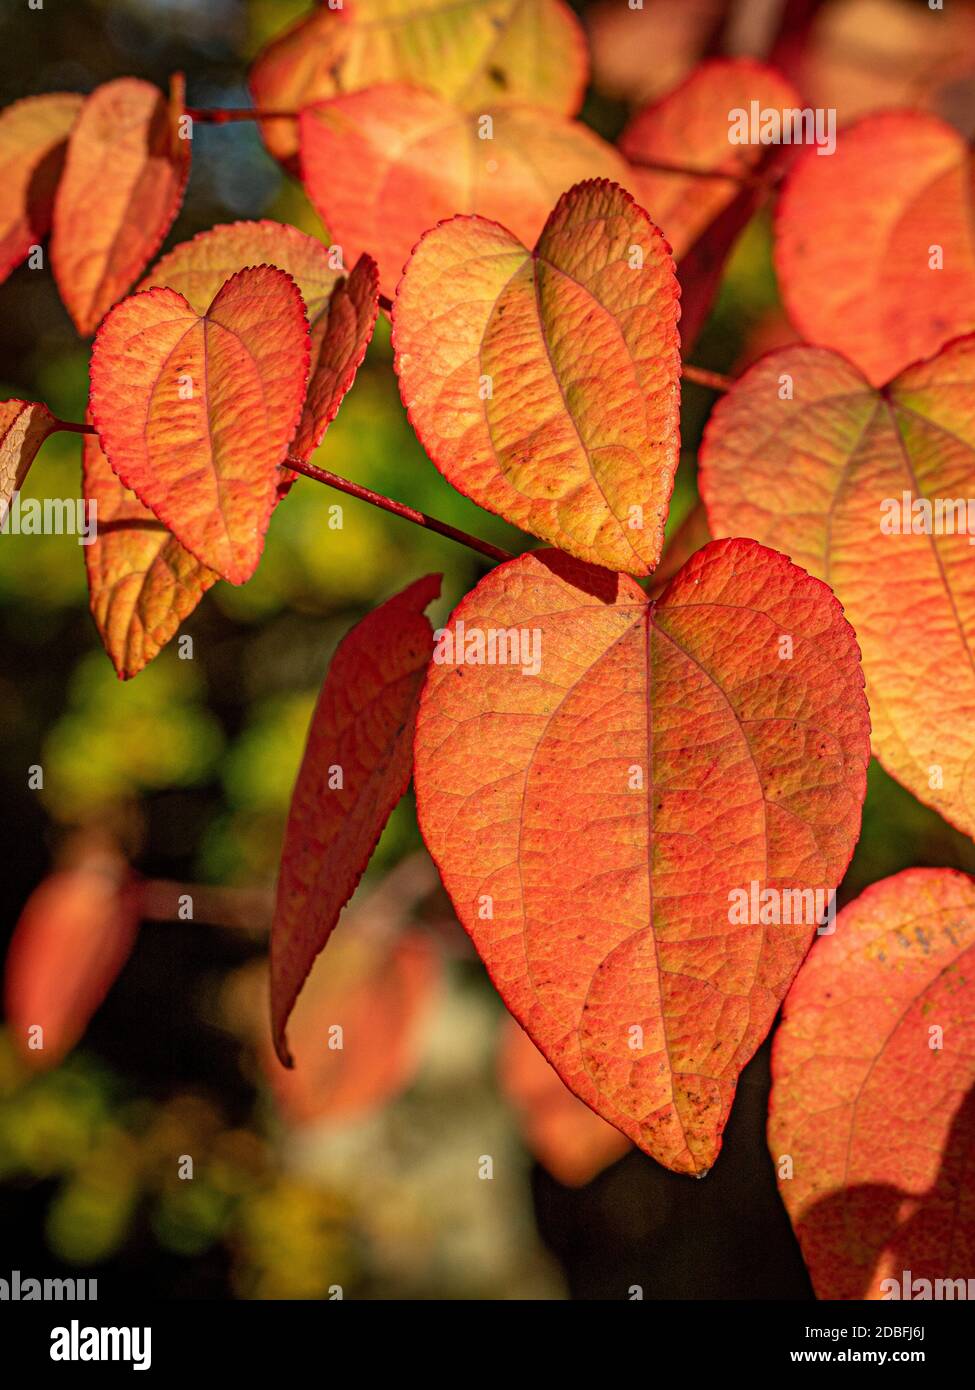 Heart shaped leaves of Cercidiphyllum japonicum 'Lisa Ann' also know as Katsura tree in Autumn Stock Photo